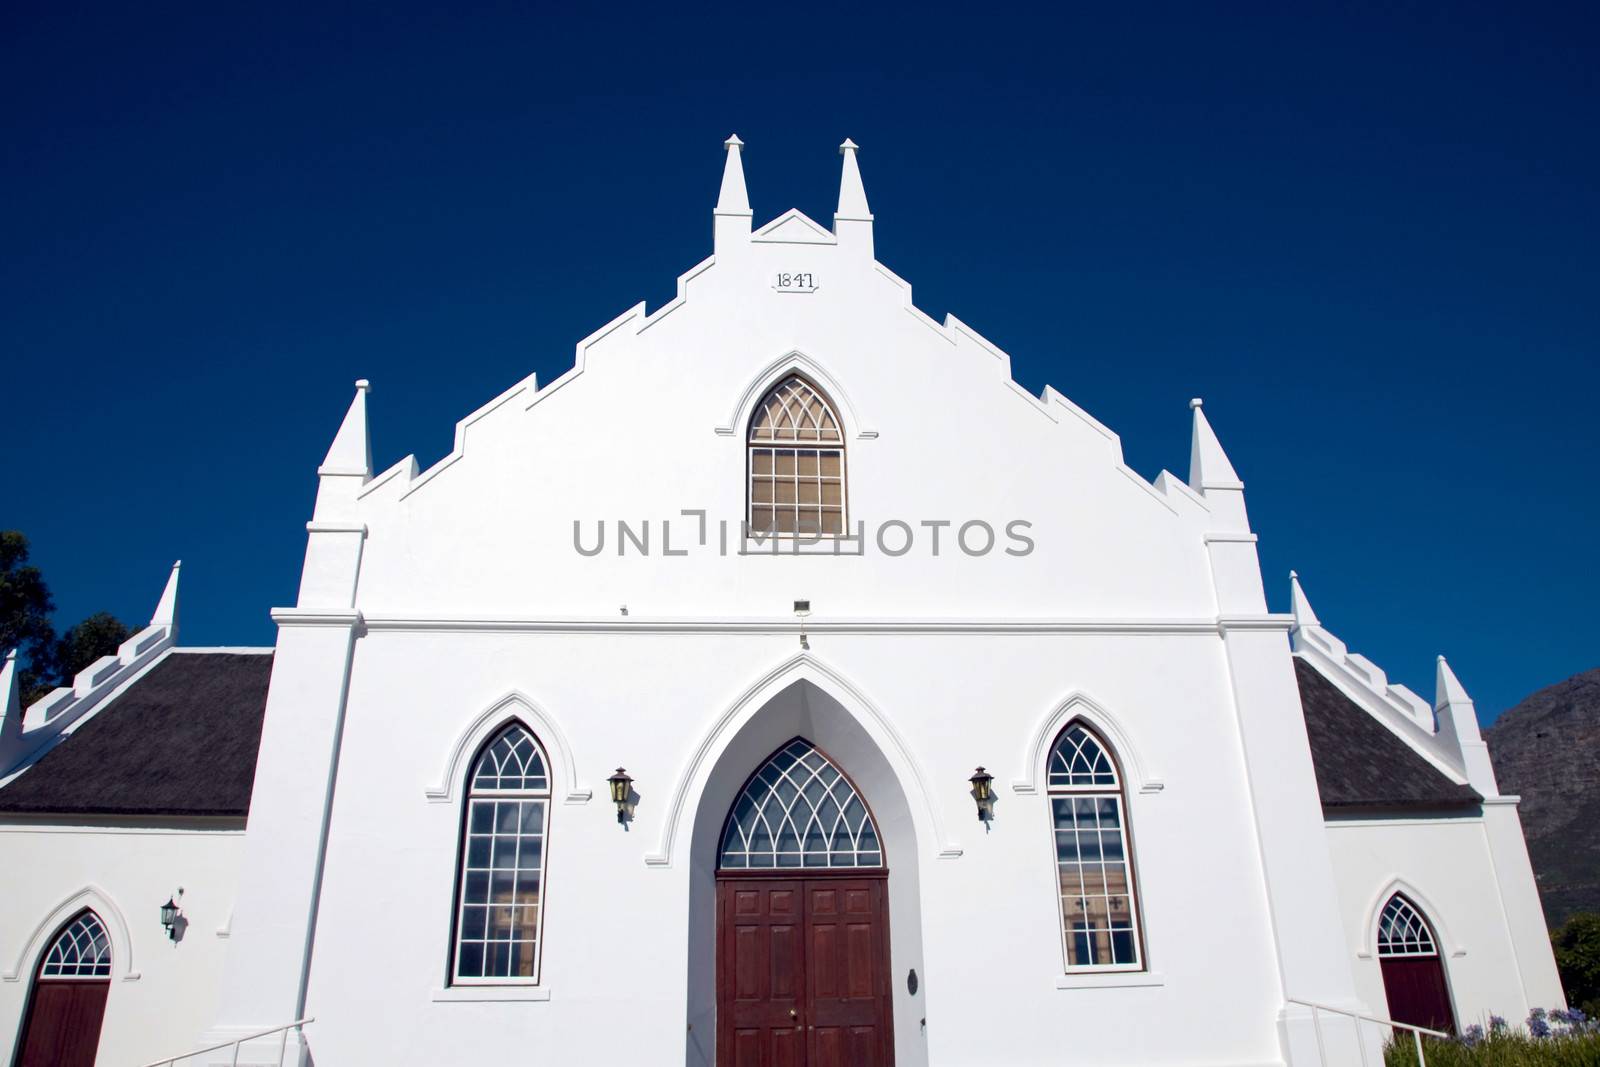 Colonial architecture in Franschhoek near Cape Town.